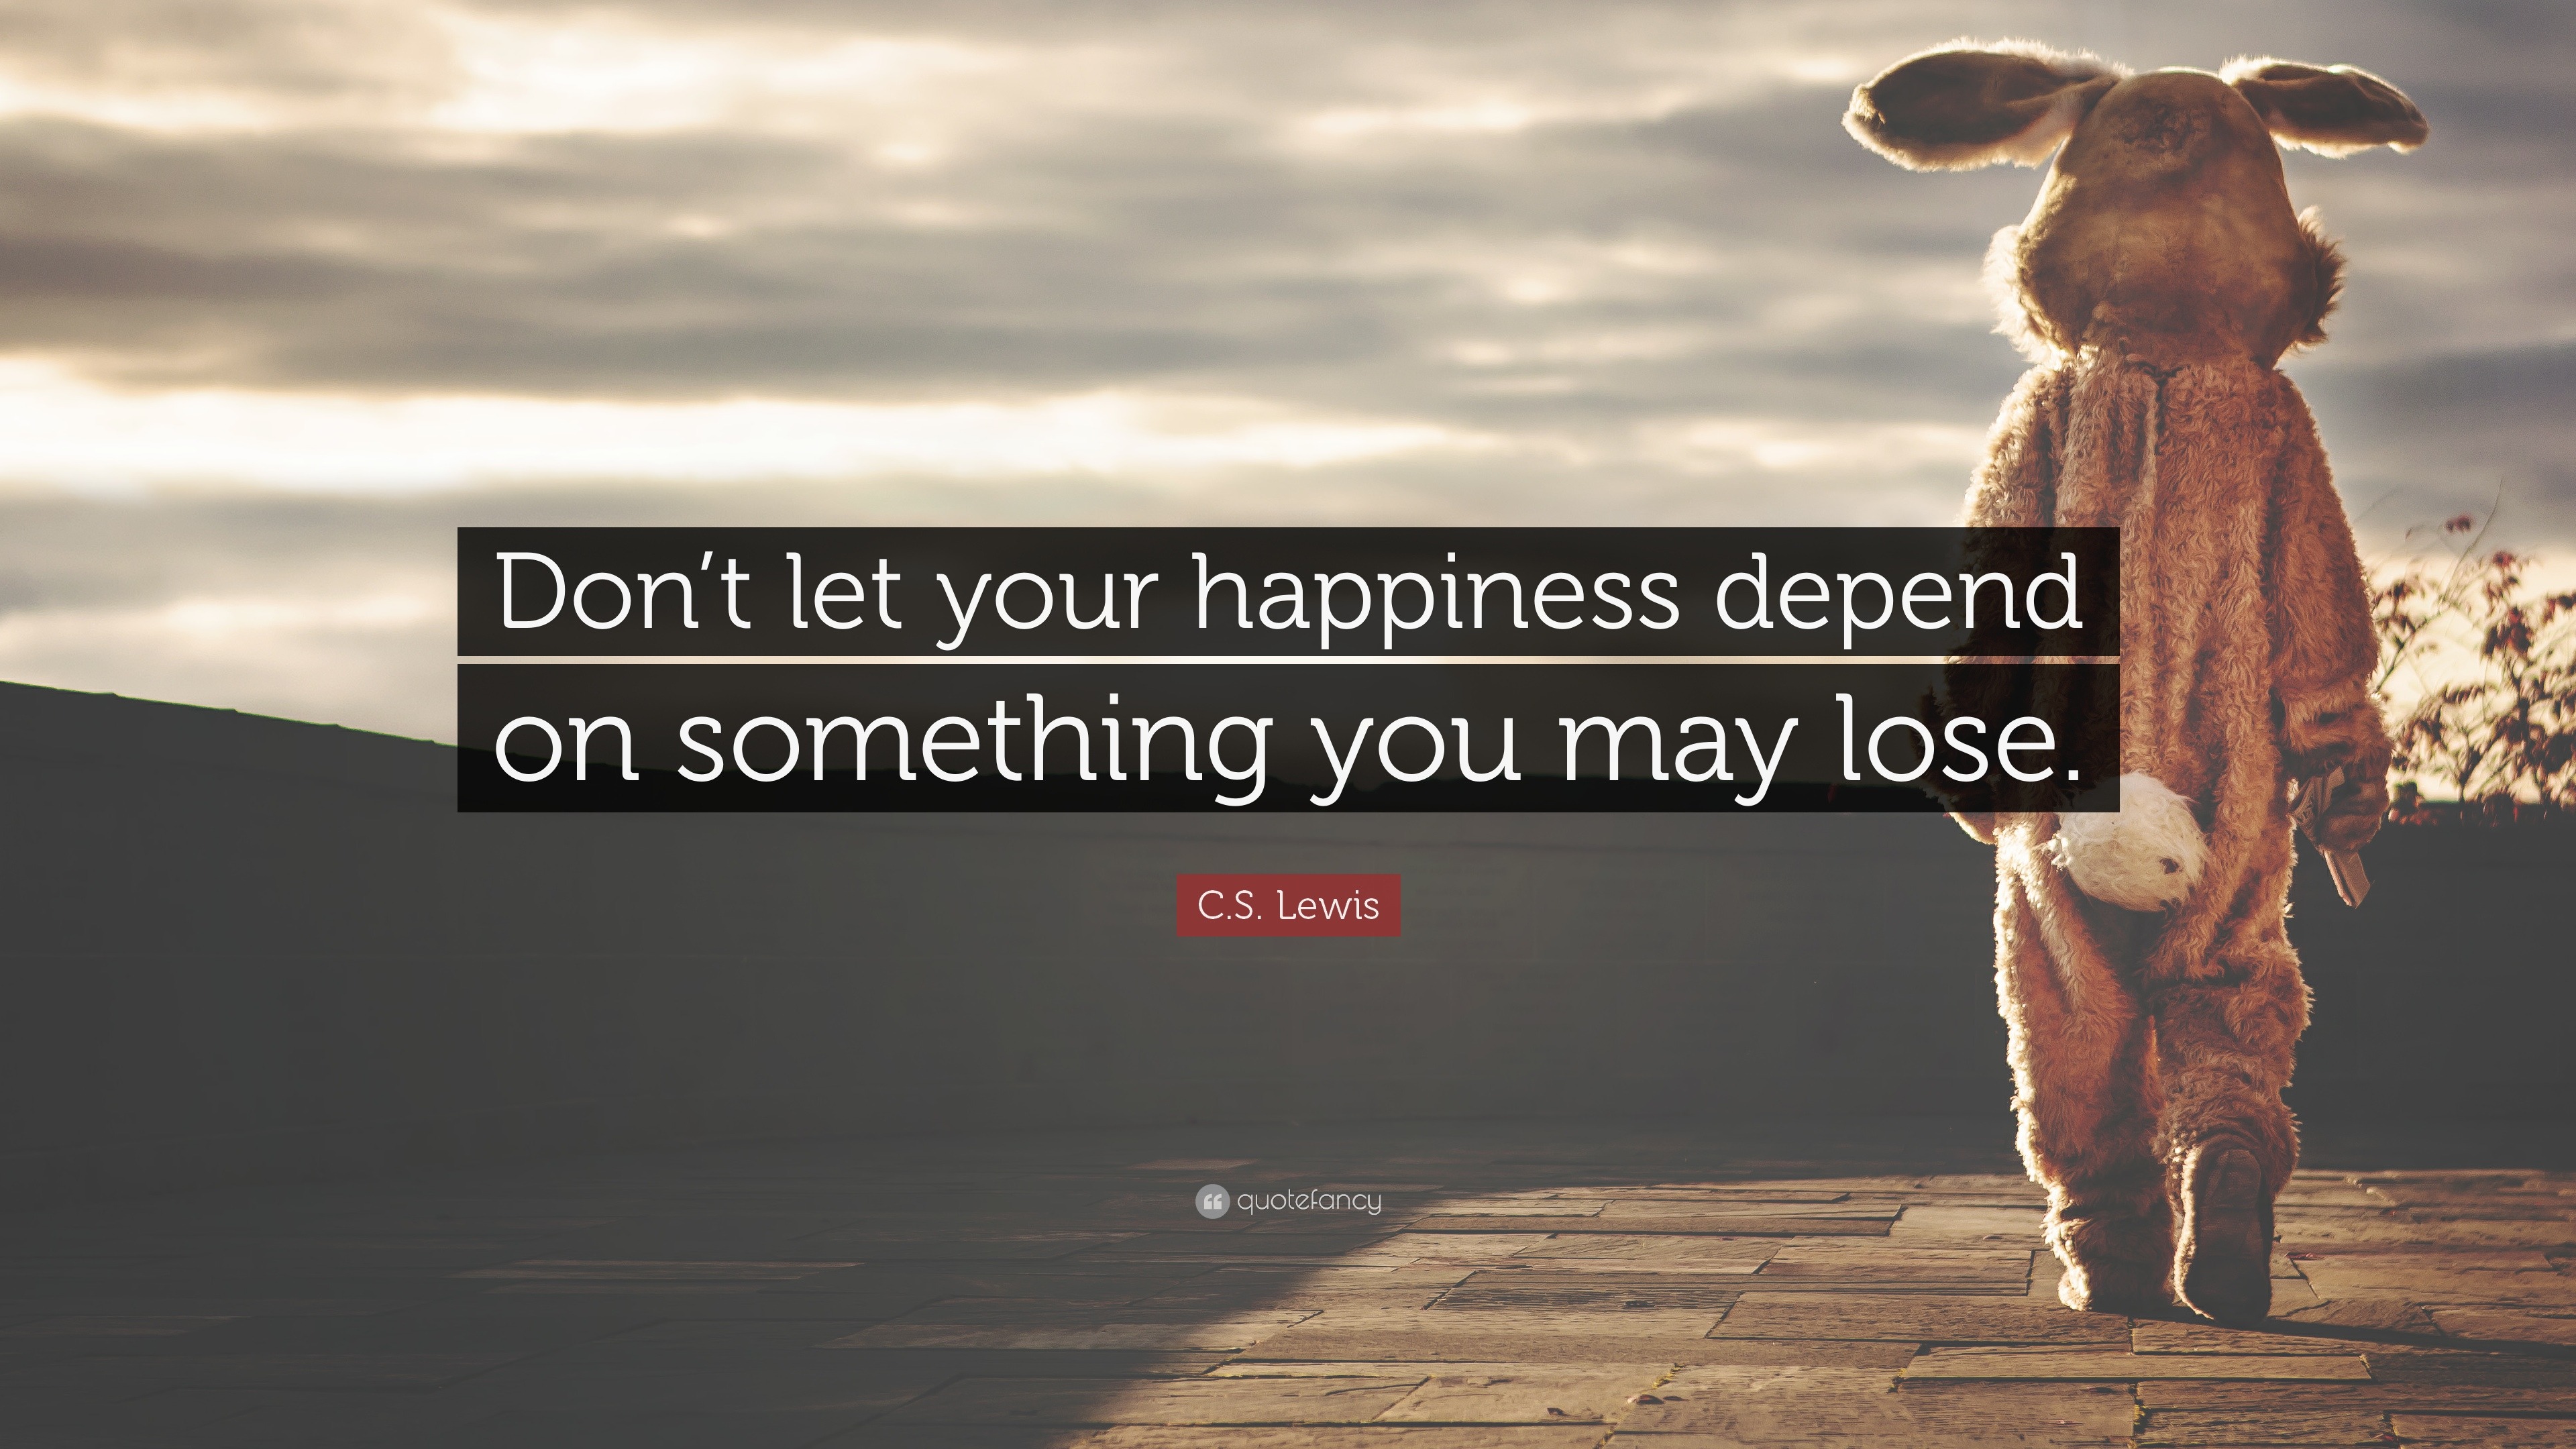 C. S. Lewis Quote: "Don’t let your happiness depend on something you 